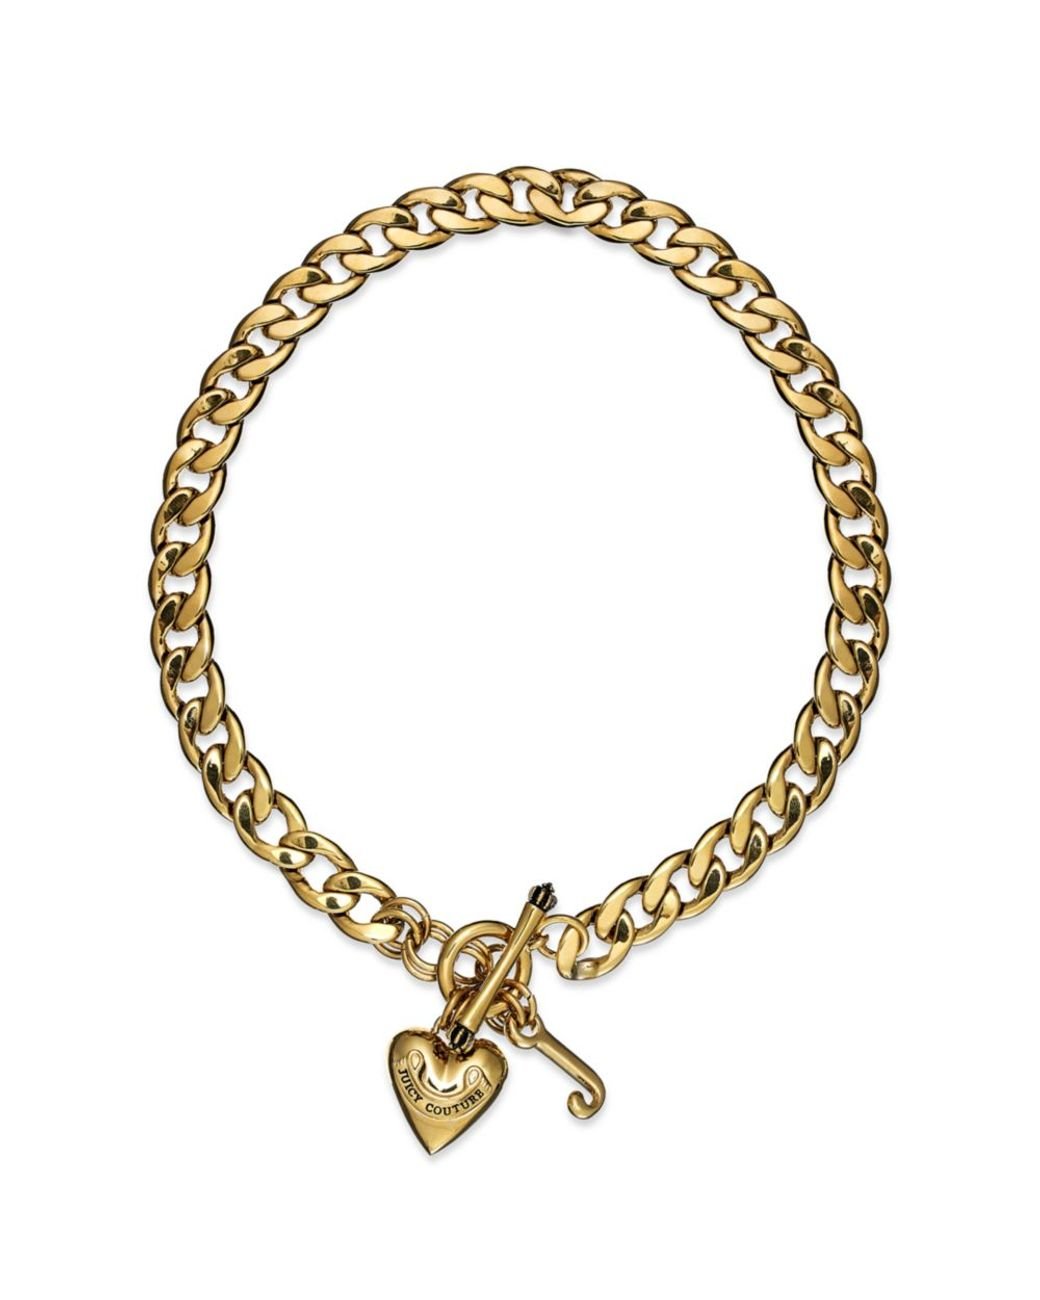 Juicy Couture Gold Tone Heart Charm Starter Collar Necklace in Metallic